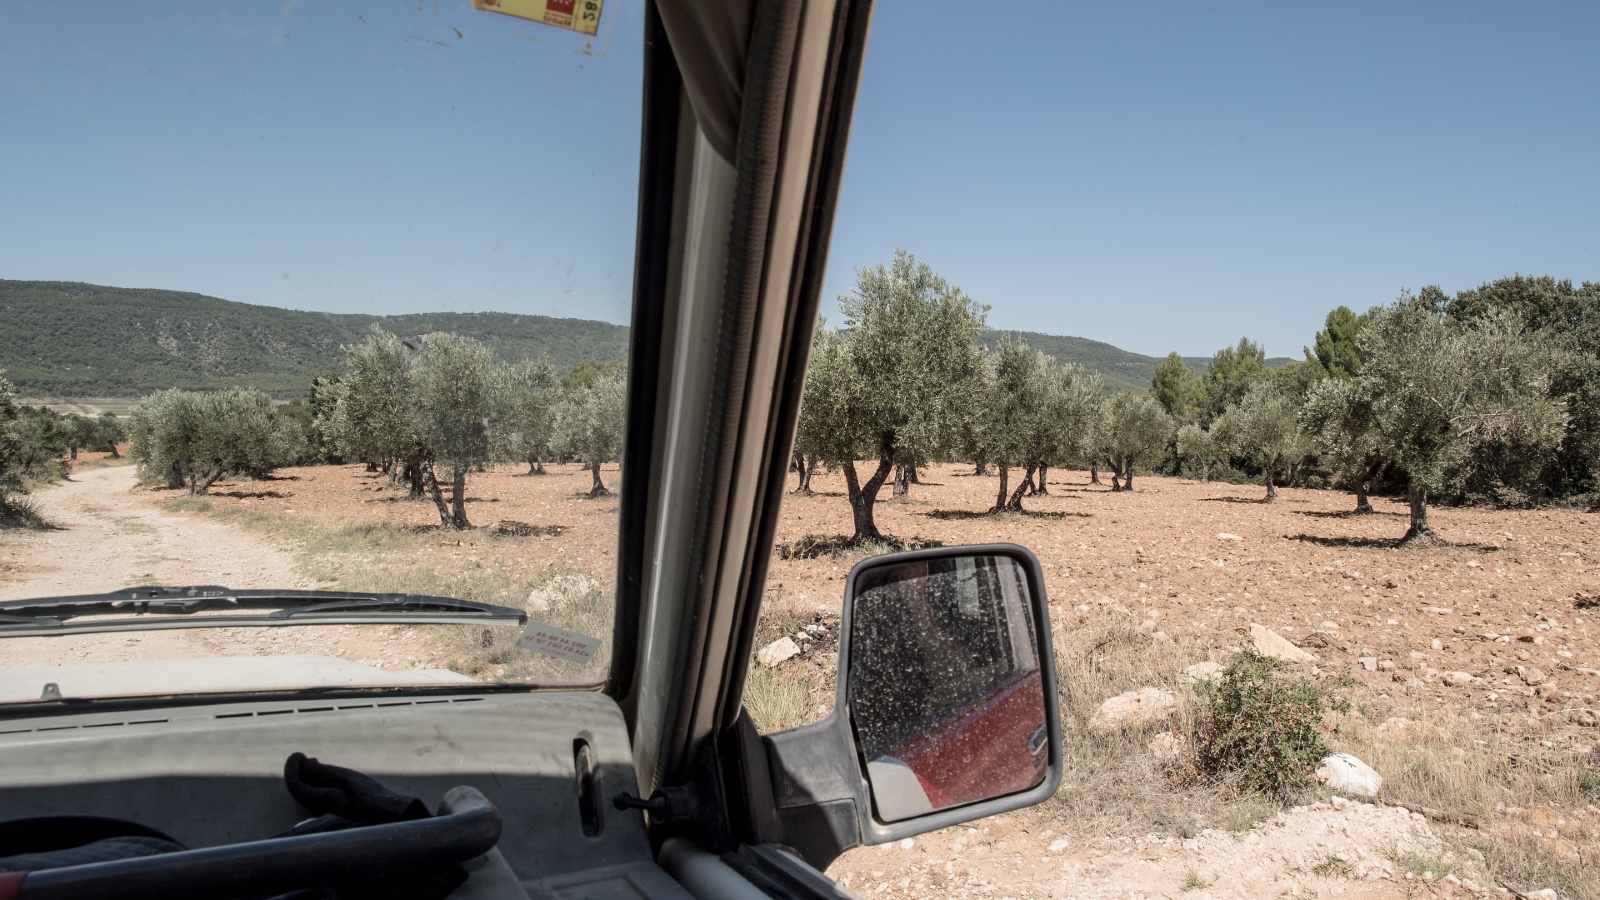 Olive trees stand on a parched landscape during a drought in Spain.